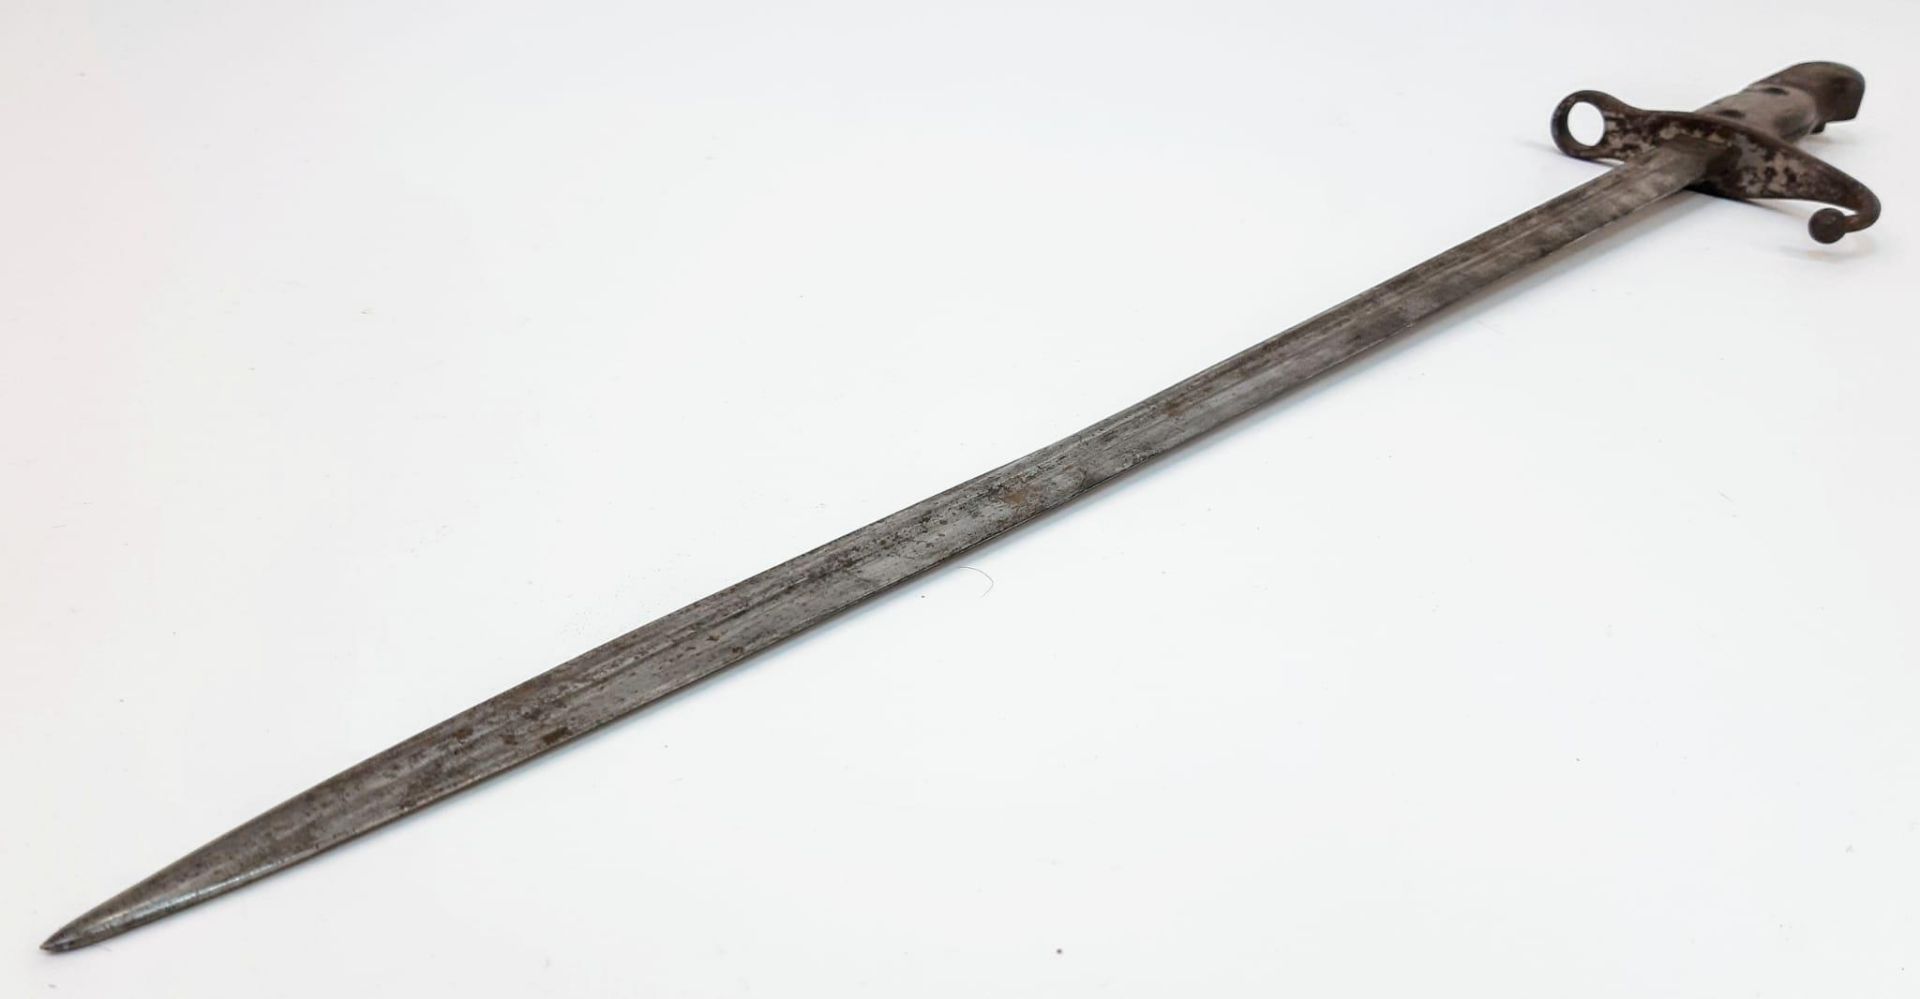 A rare, authentic Ottoman Mauser M1903 bayonet with original scabbard, datedv1907/08 (Islamic year - Image 2 of 6